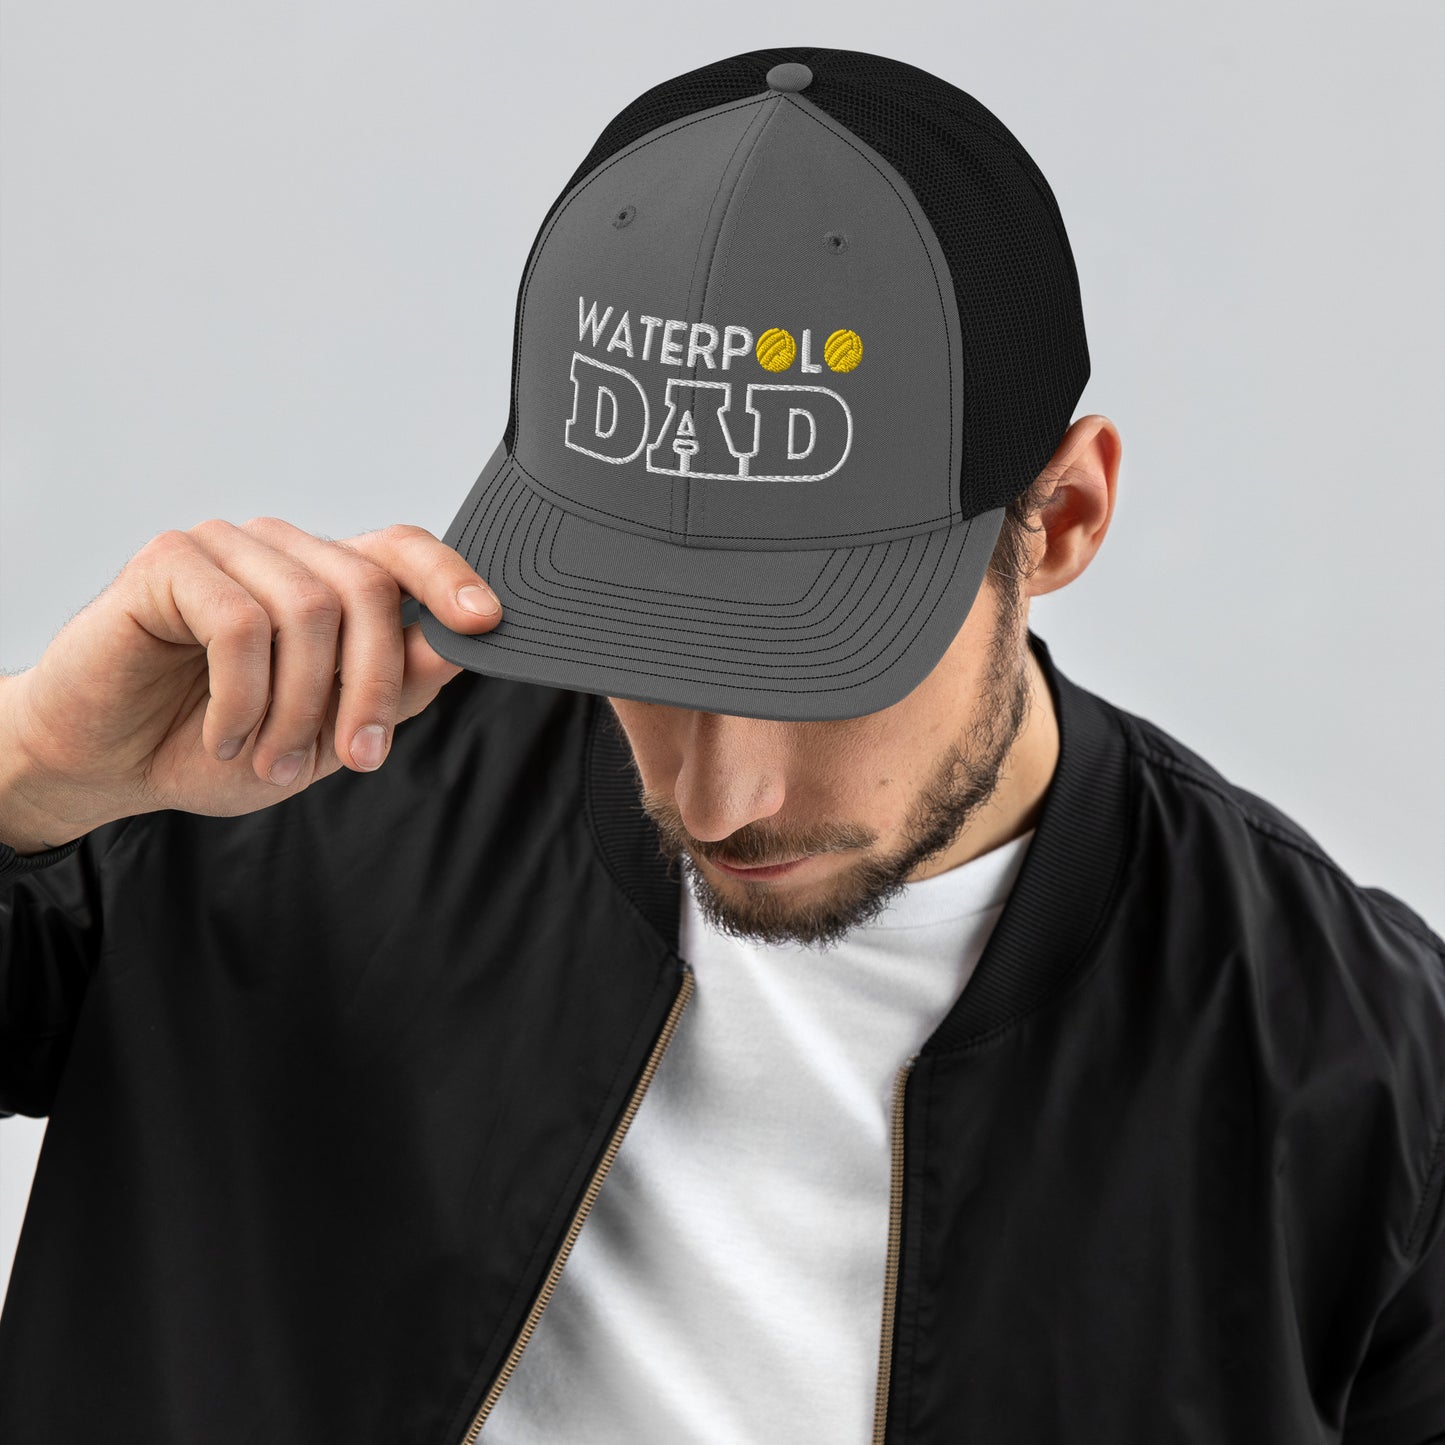 Waterpolo Dad - Embroidered Snapback Trucker Cap | Richardson 112